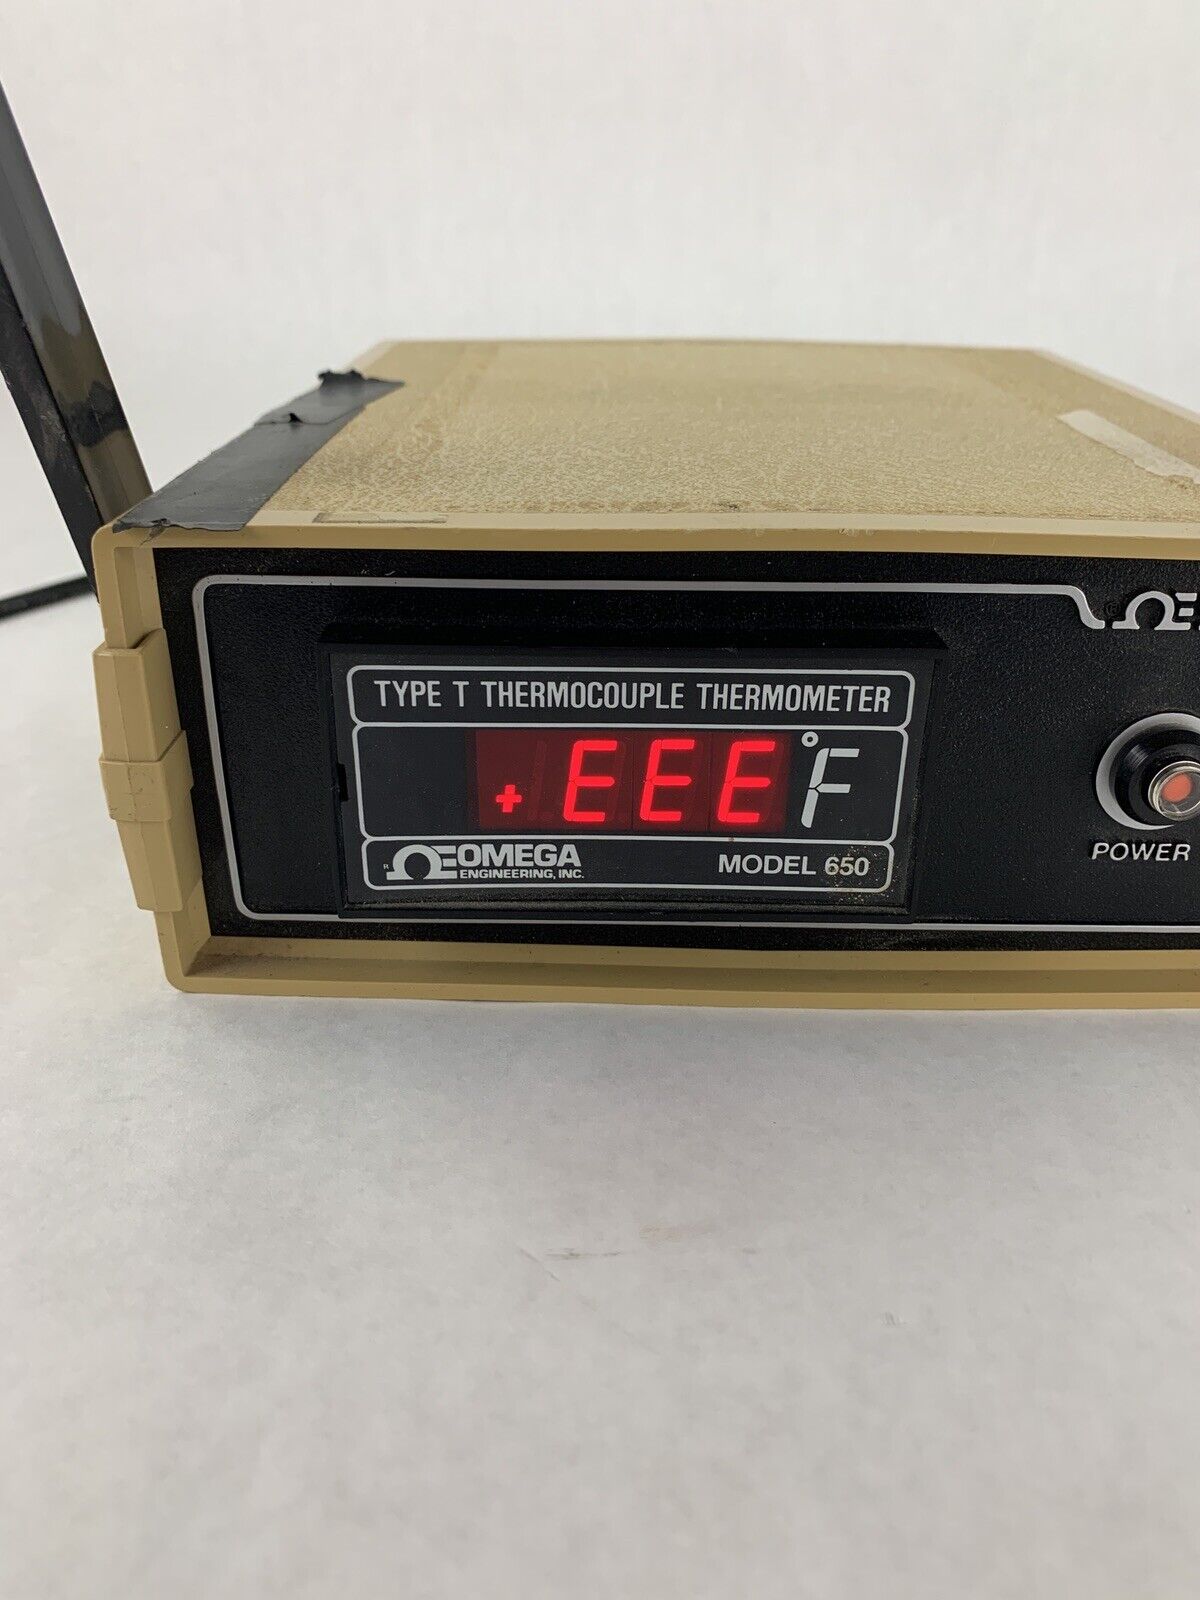 Omega Model 650 Type J Thermocouple Thermometer Power Tested